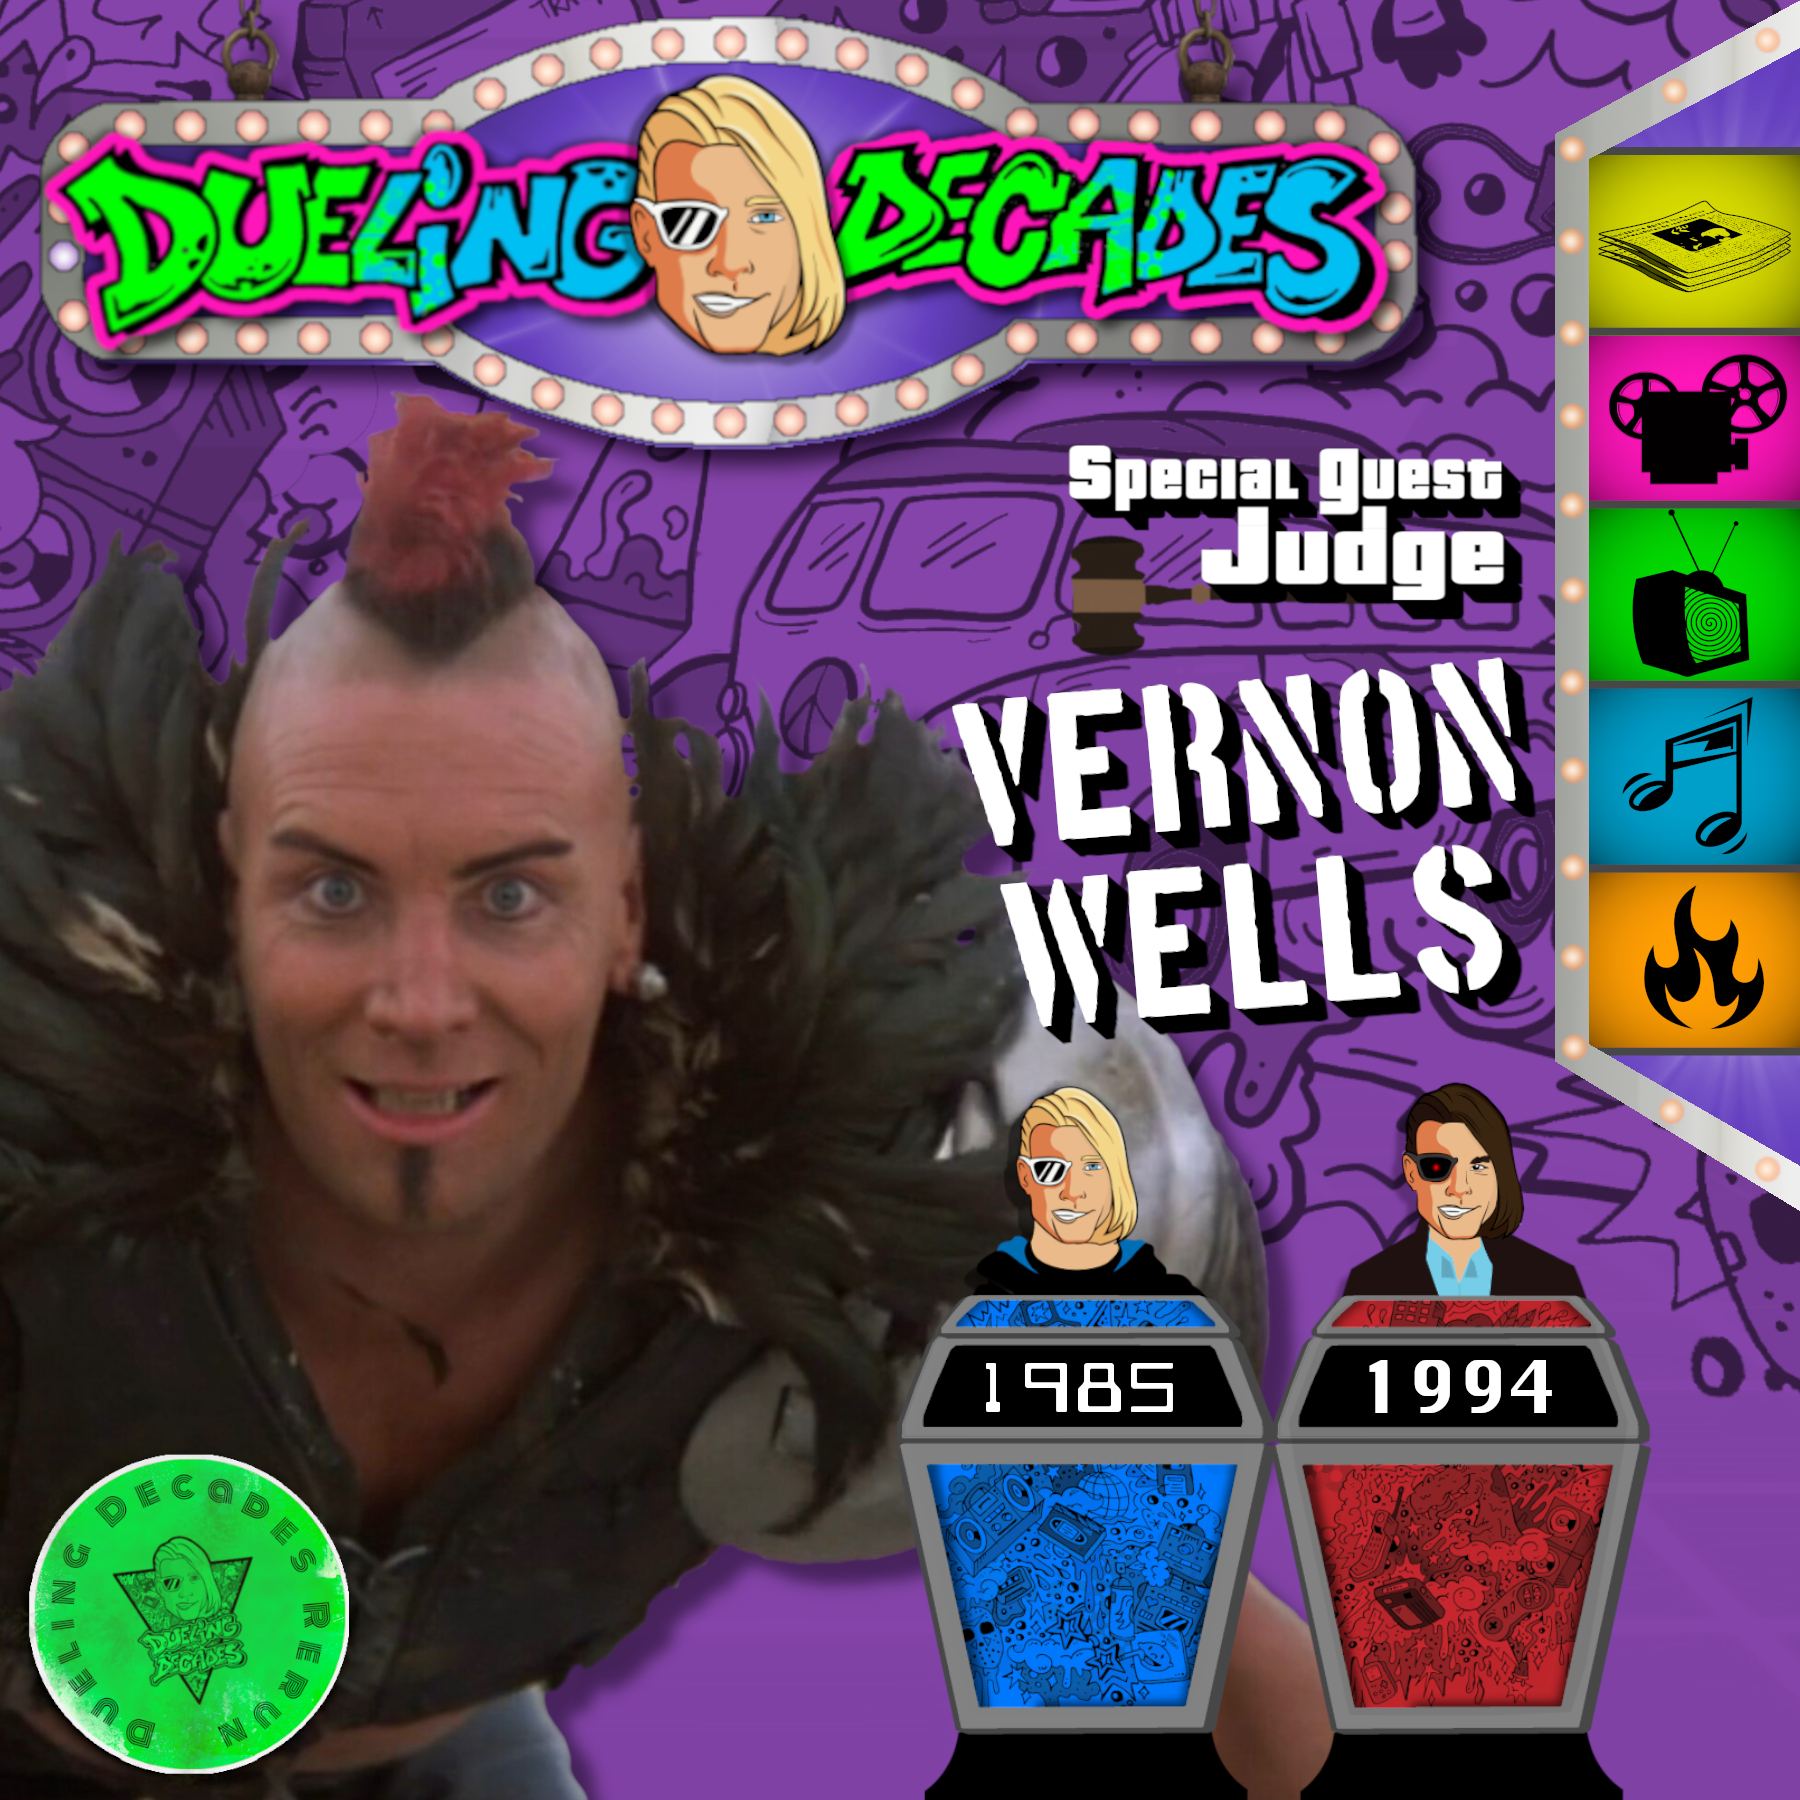 Classic Dueling Decades rewind with guest Vernon Wells judging between 1984 & 1985!